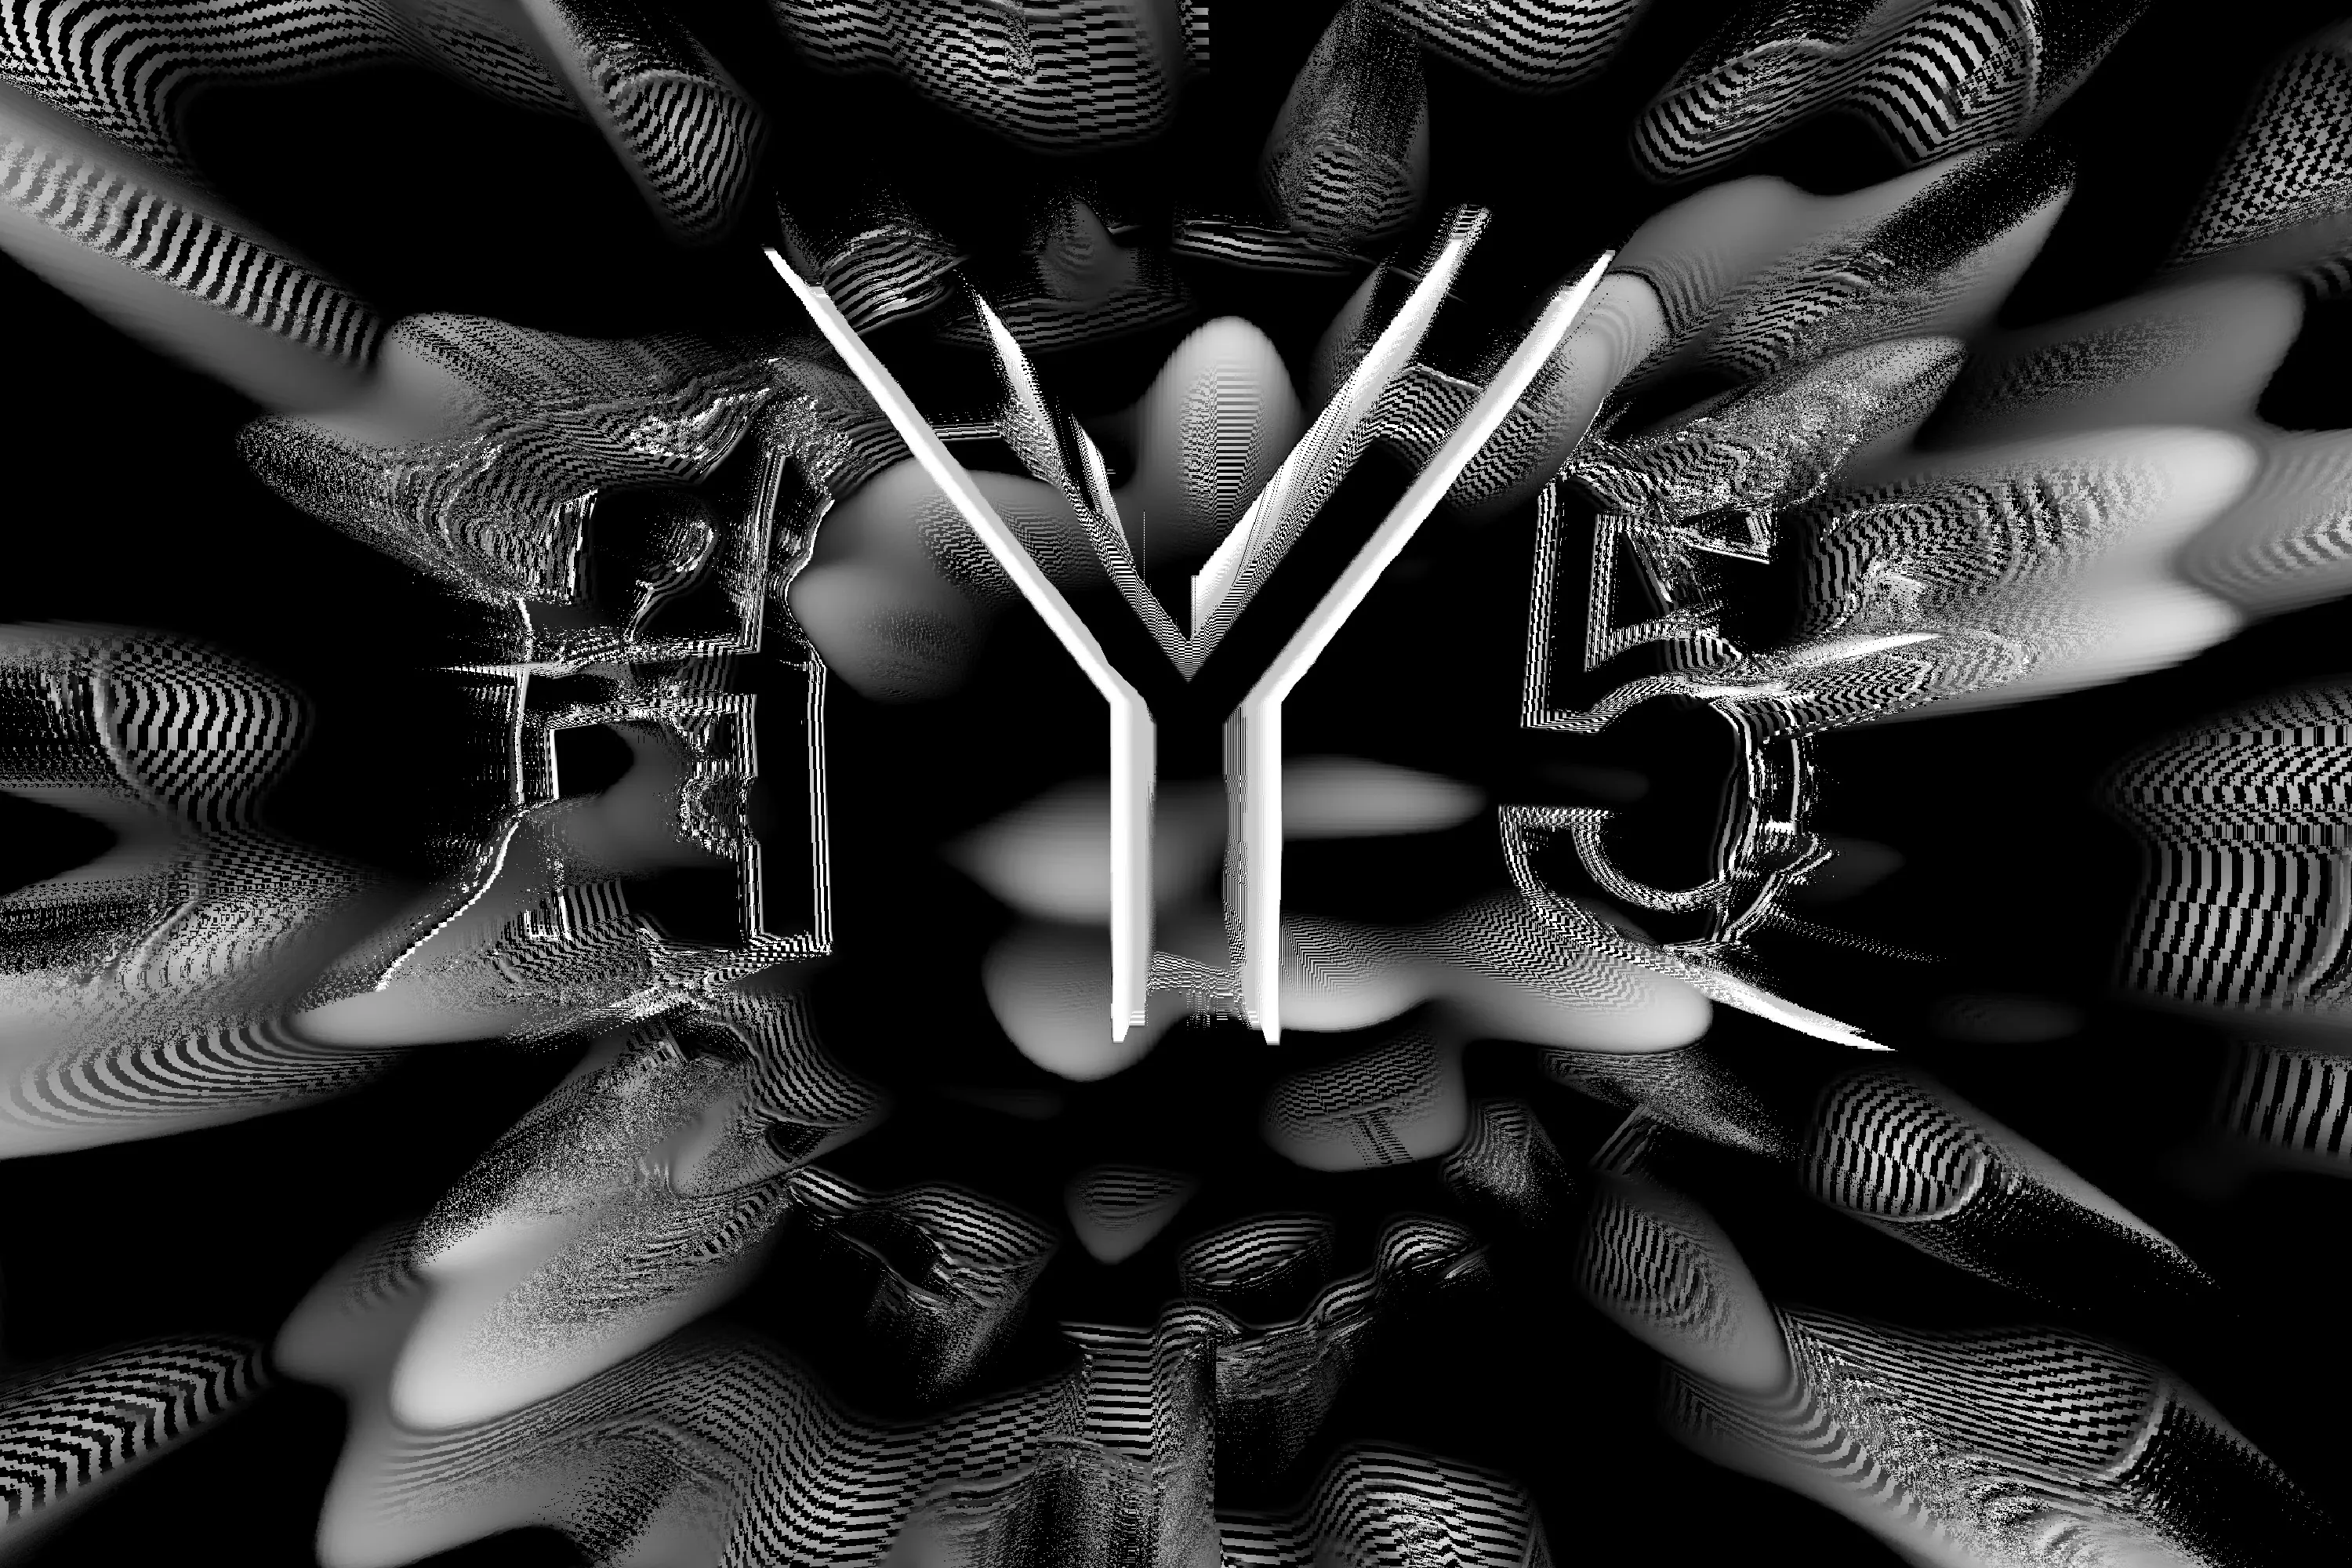 p5.js spheres with texture from hydra and 'HY5' text, processed a second time with hydra.